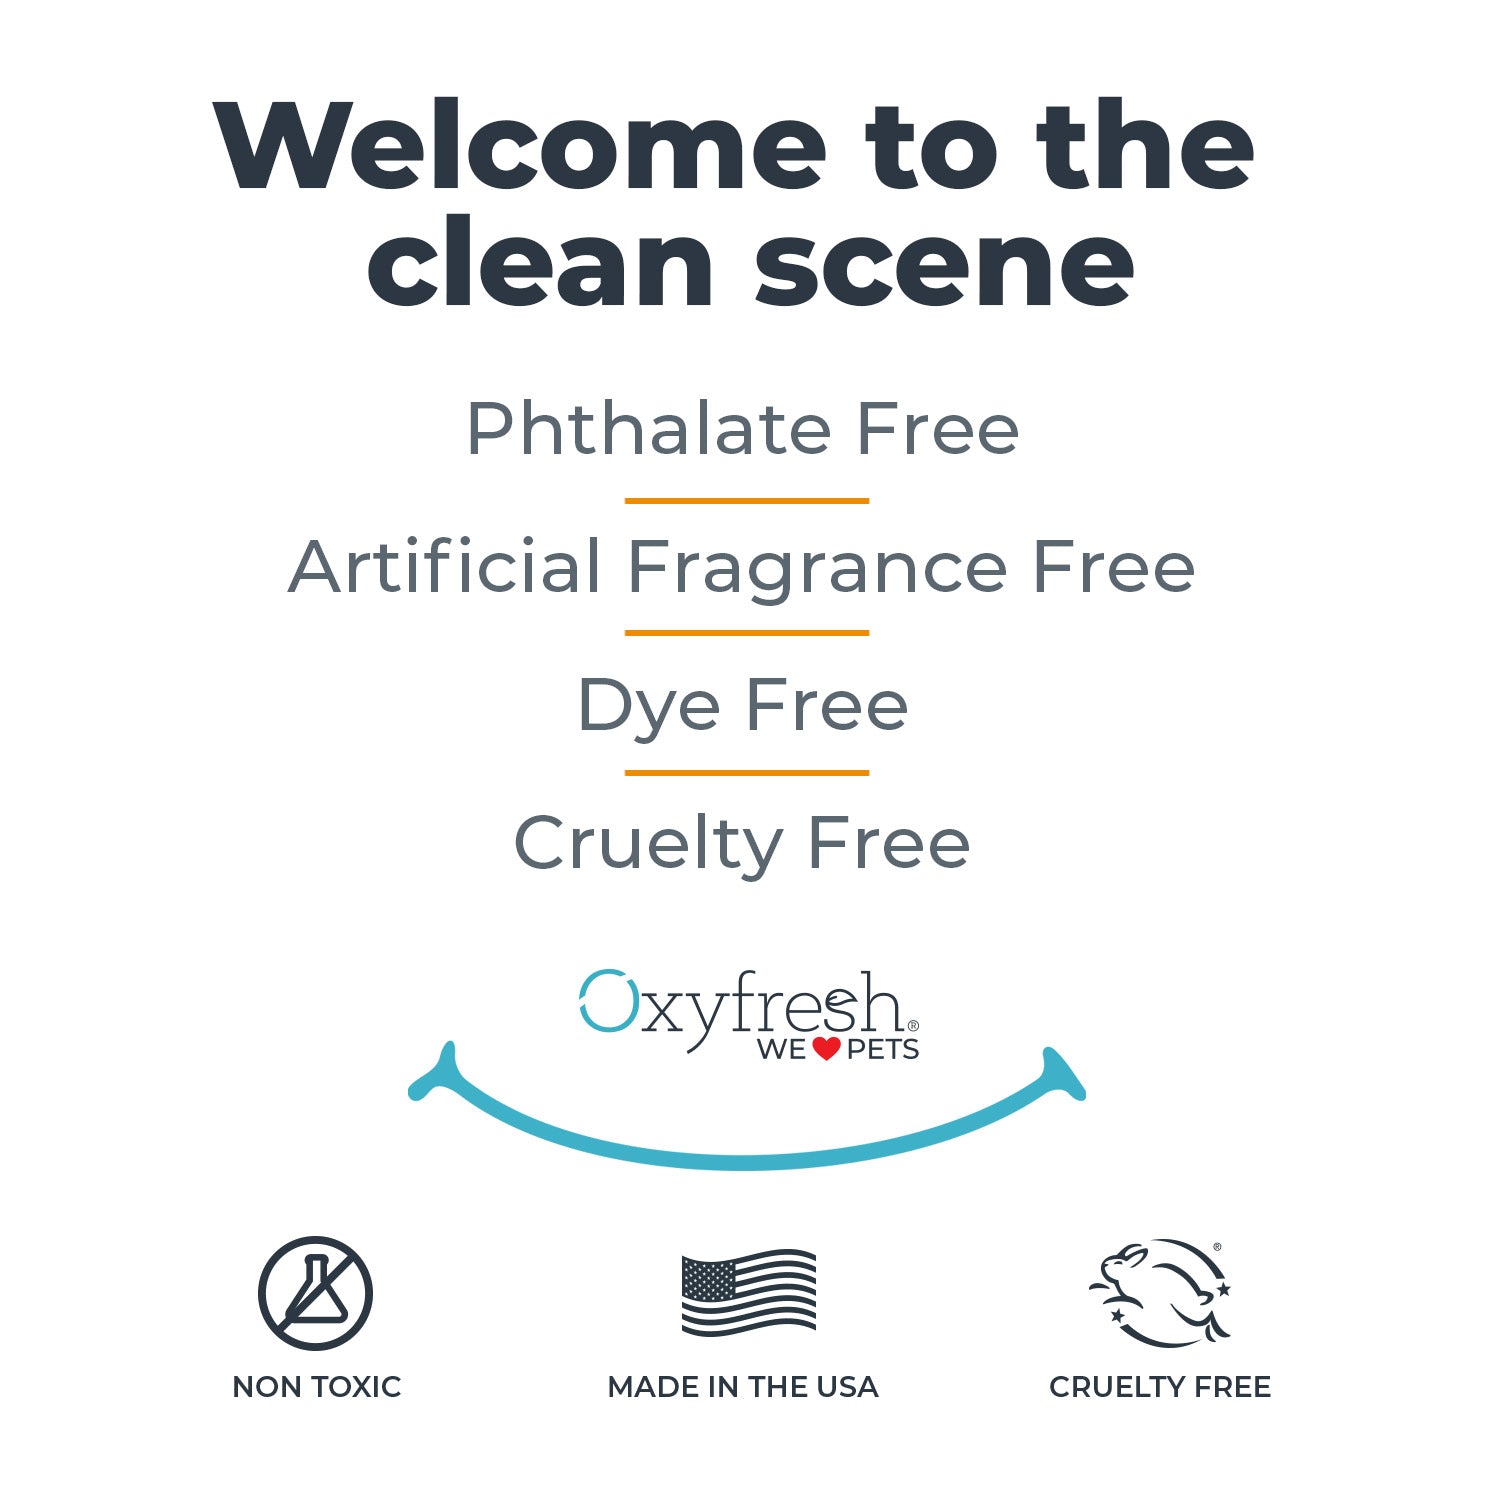 oxyfresh-pet-shampoo-is-free-of-phthalate-artificial-fragrances-dyes-and-is-cruelty-free